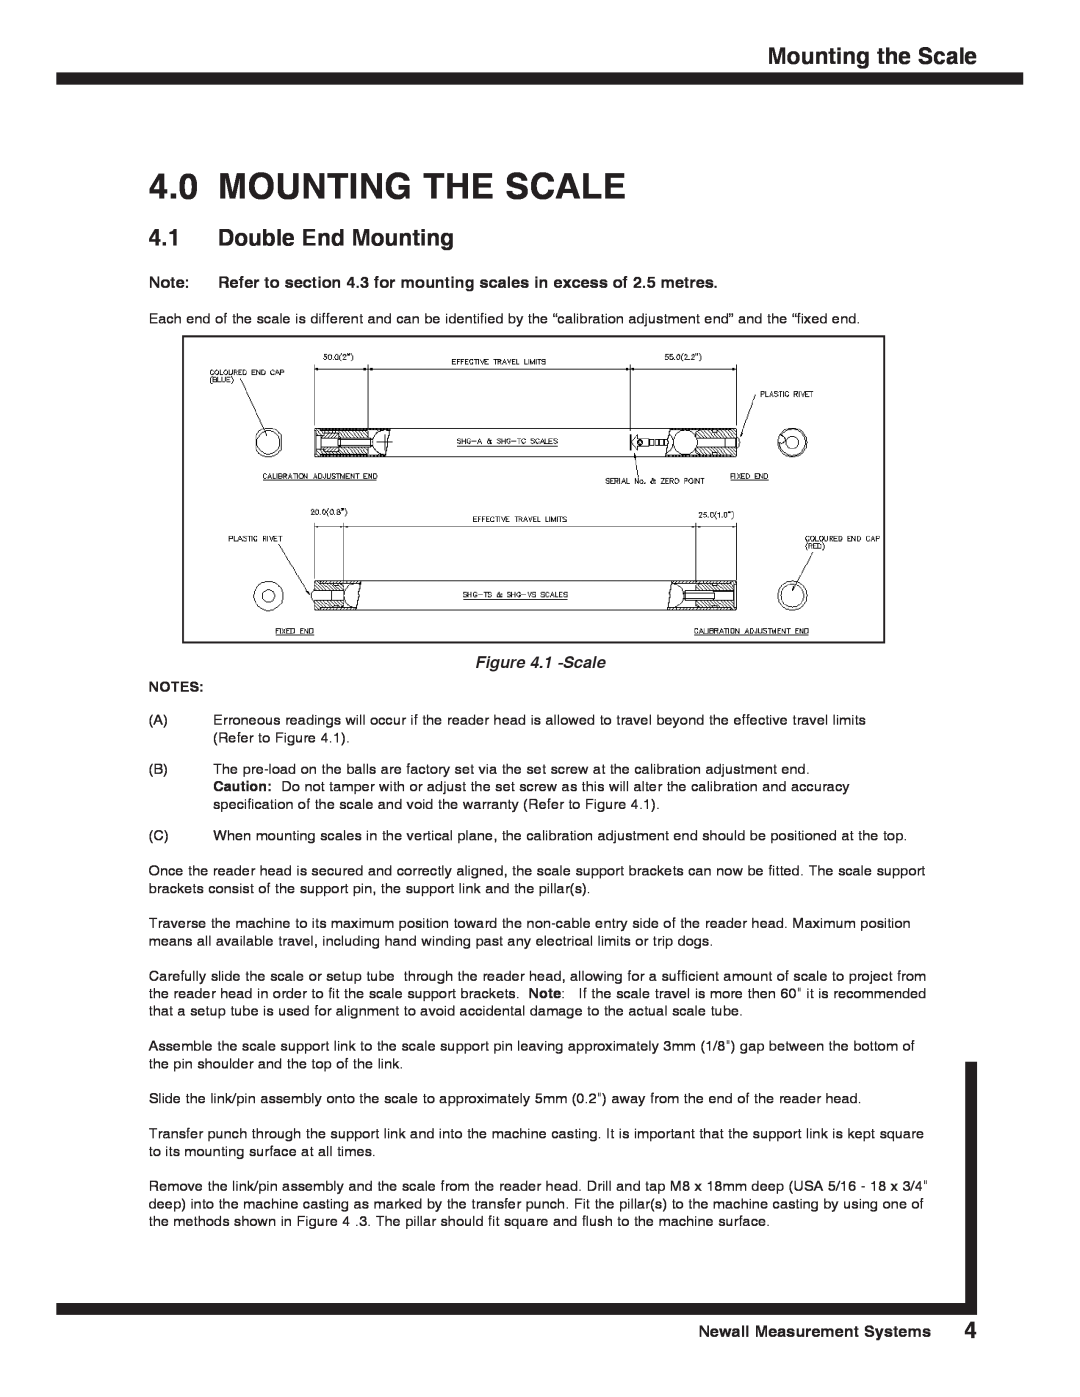 Microsoft SHG-TS 4.0MOUNTING THE SCALE, Mounting the Scale, 4.1Double End Mounting, 1 -Scale, Newall Measurement Systems 